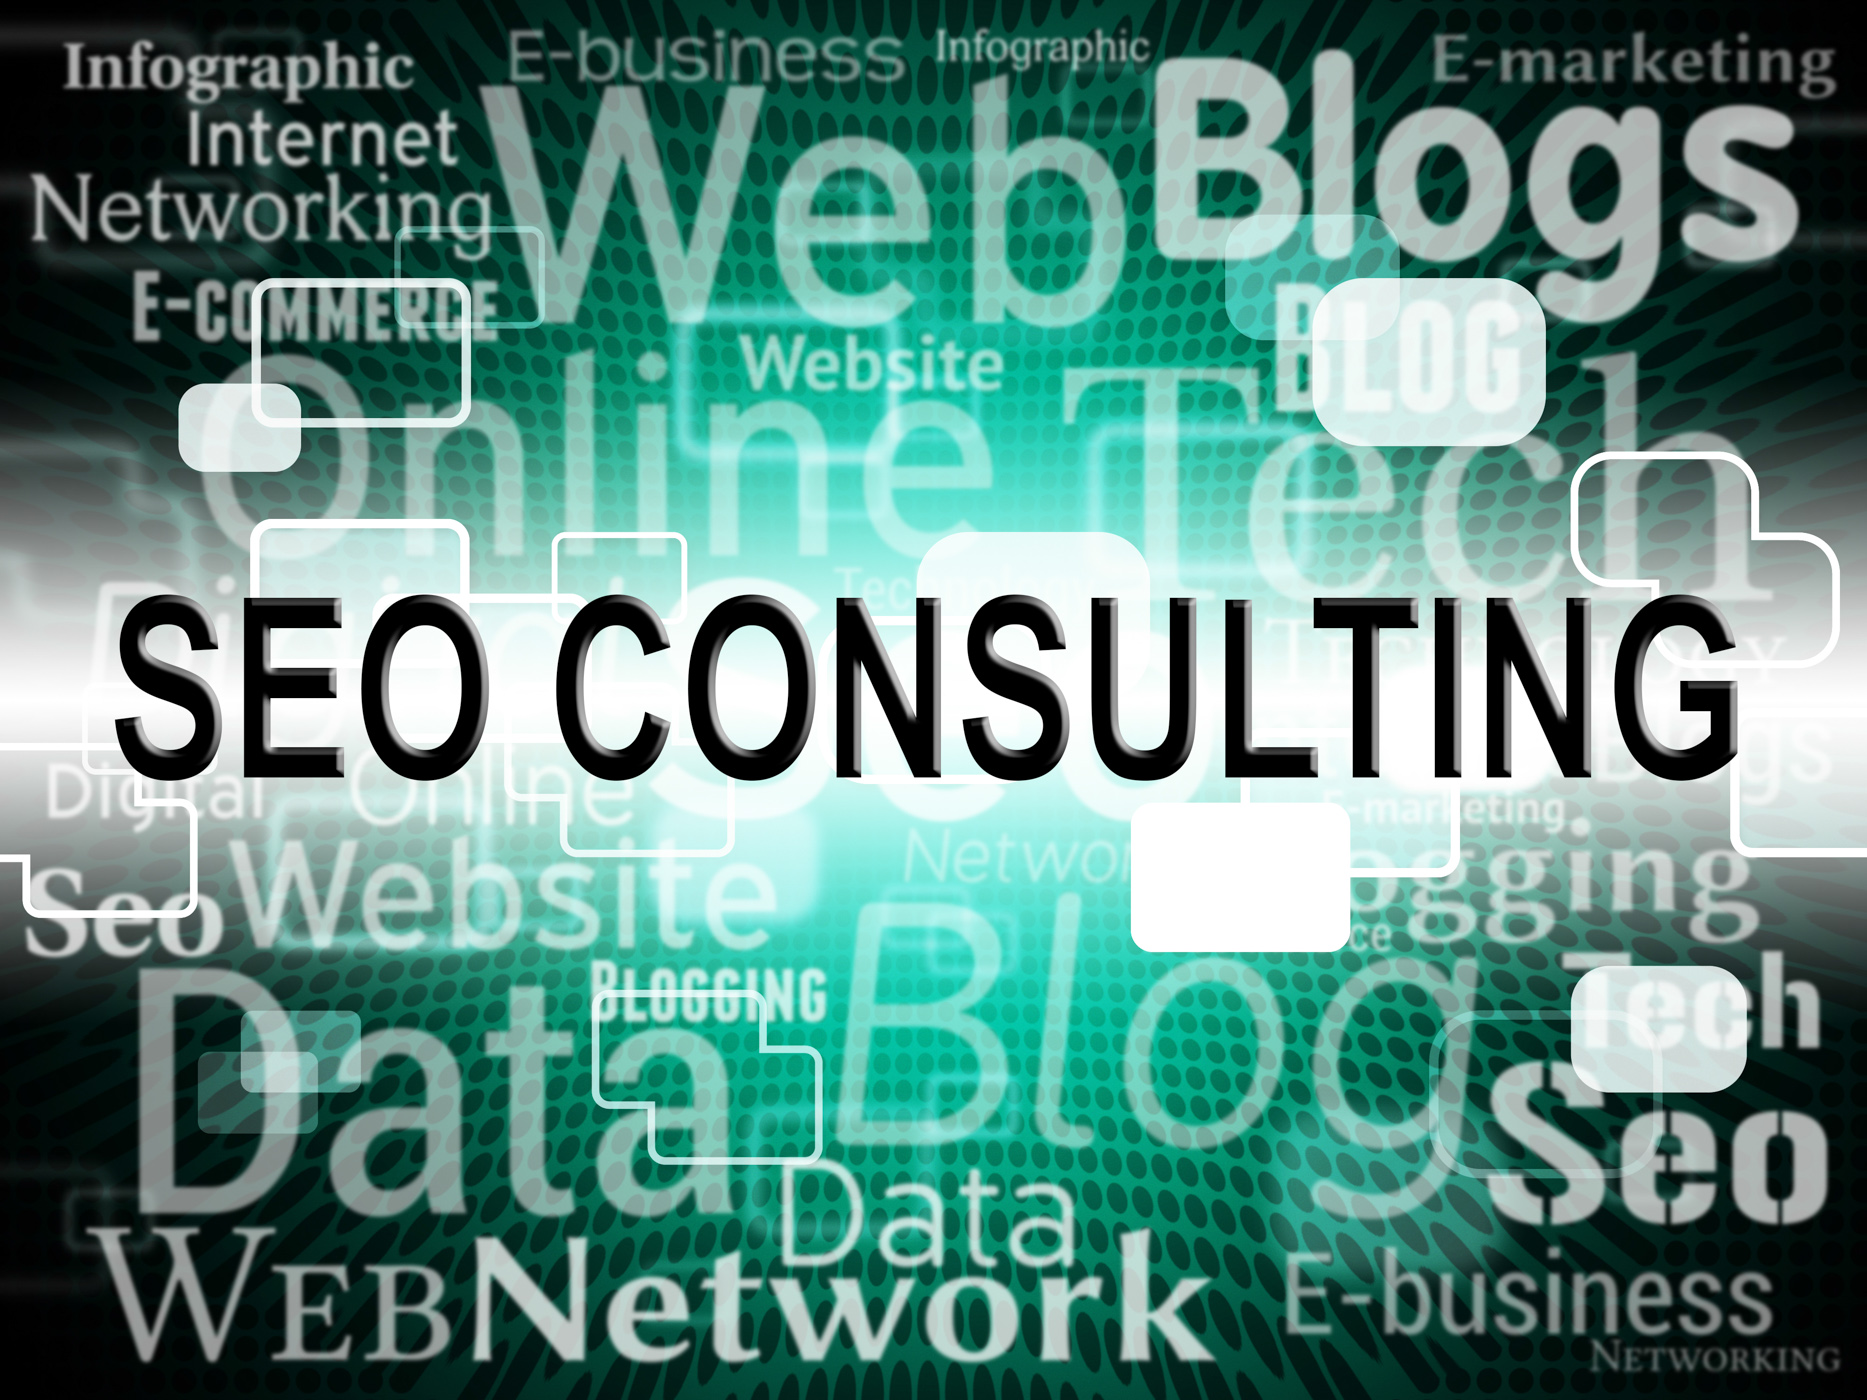 Seo consulting means search engine and advice photo